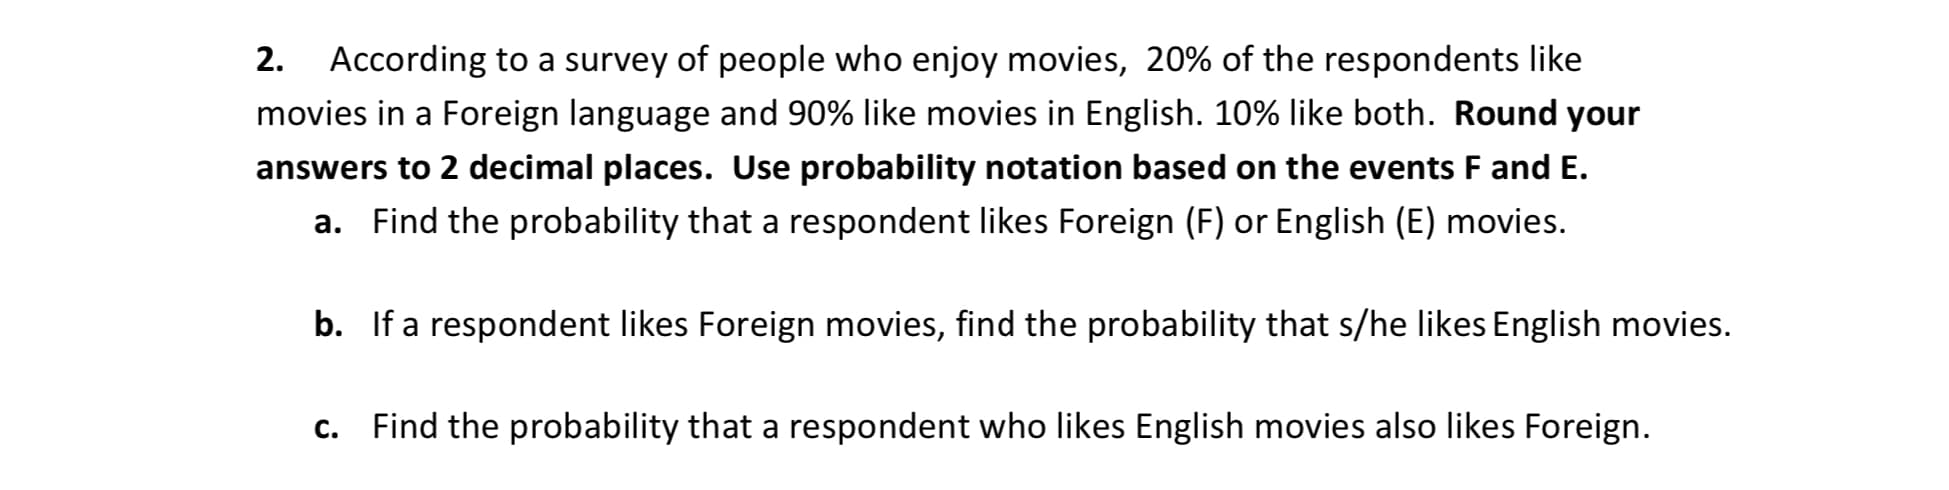 2. According to a survey of people who enjoy movies, 20% of the respondents like
movies in a Foreign language and 90% like movies in English. 10% like both. Round your
answers to 2 decimal places. Use probability notation based on the events F and E.
a. Find the probability that a respondent likes Foreign (F) or English (E) movies.
b. If a respondent likes Foreign movies, find the probability that s/he likes English movies.
c. Find the probability that a respondent who likes English movies also likes Foreign.
